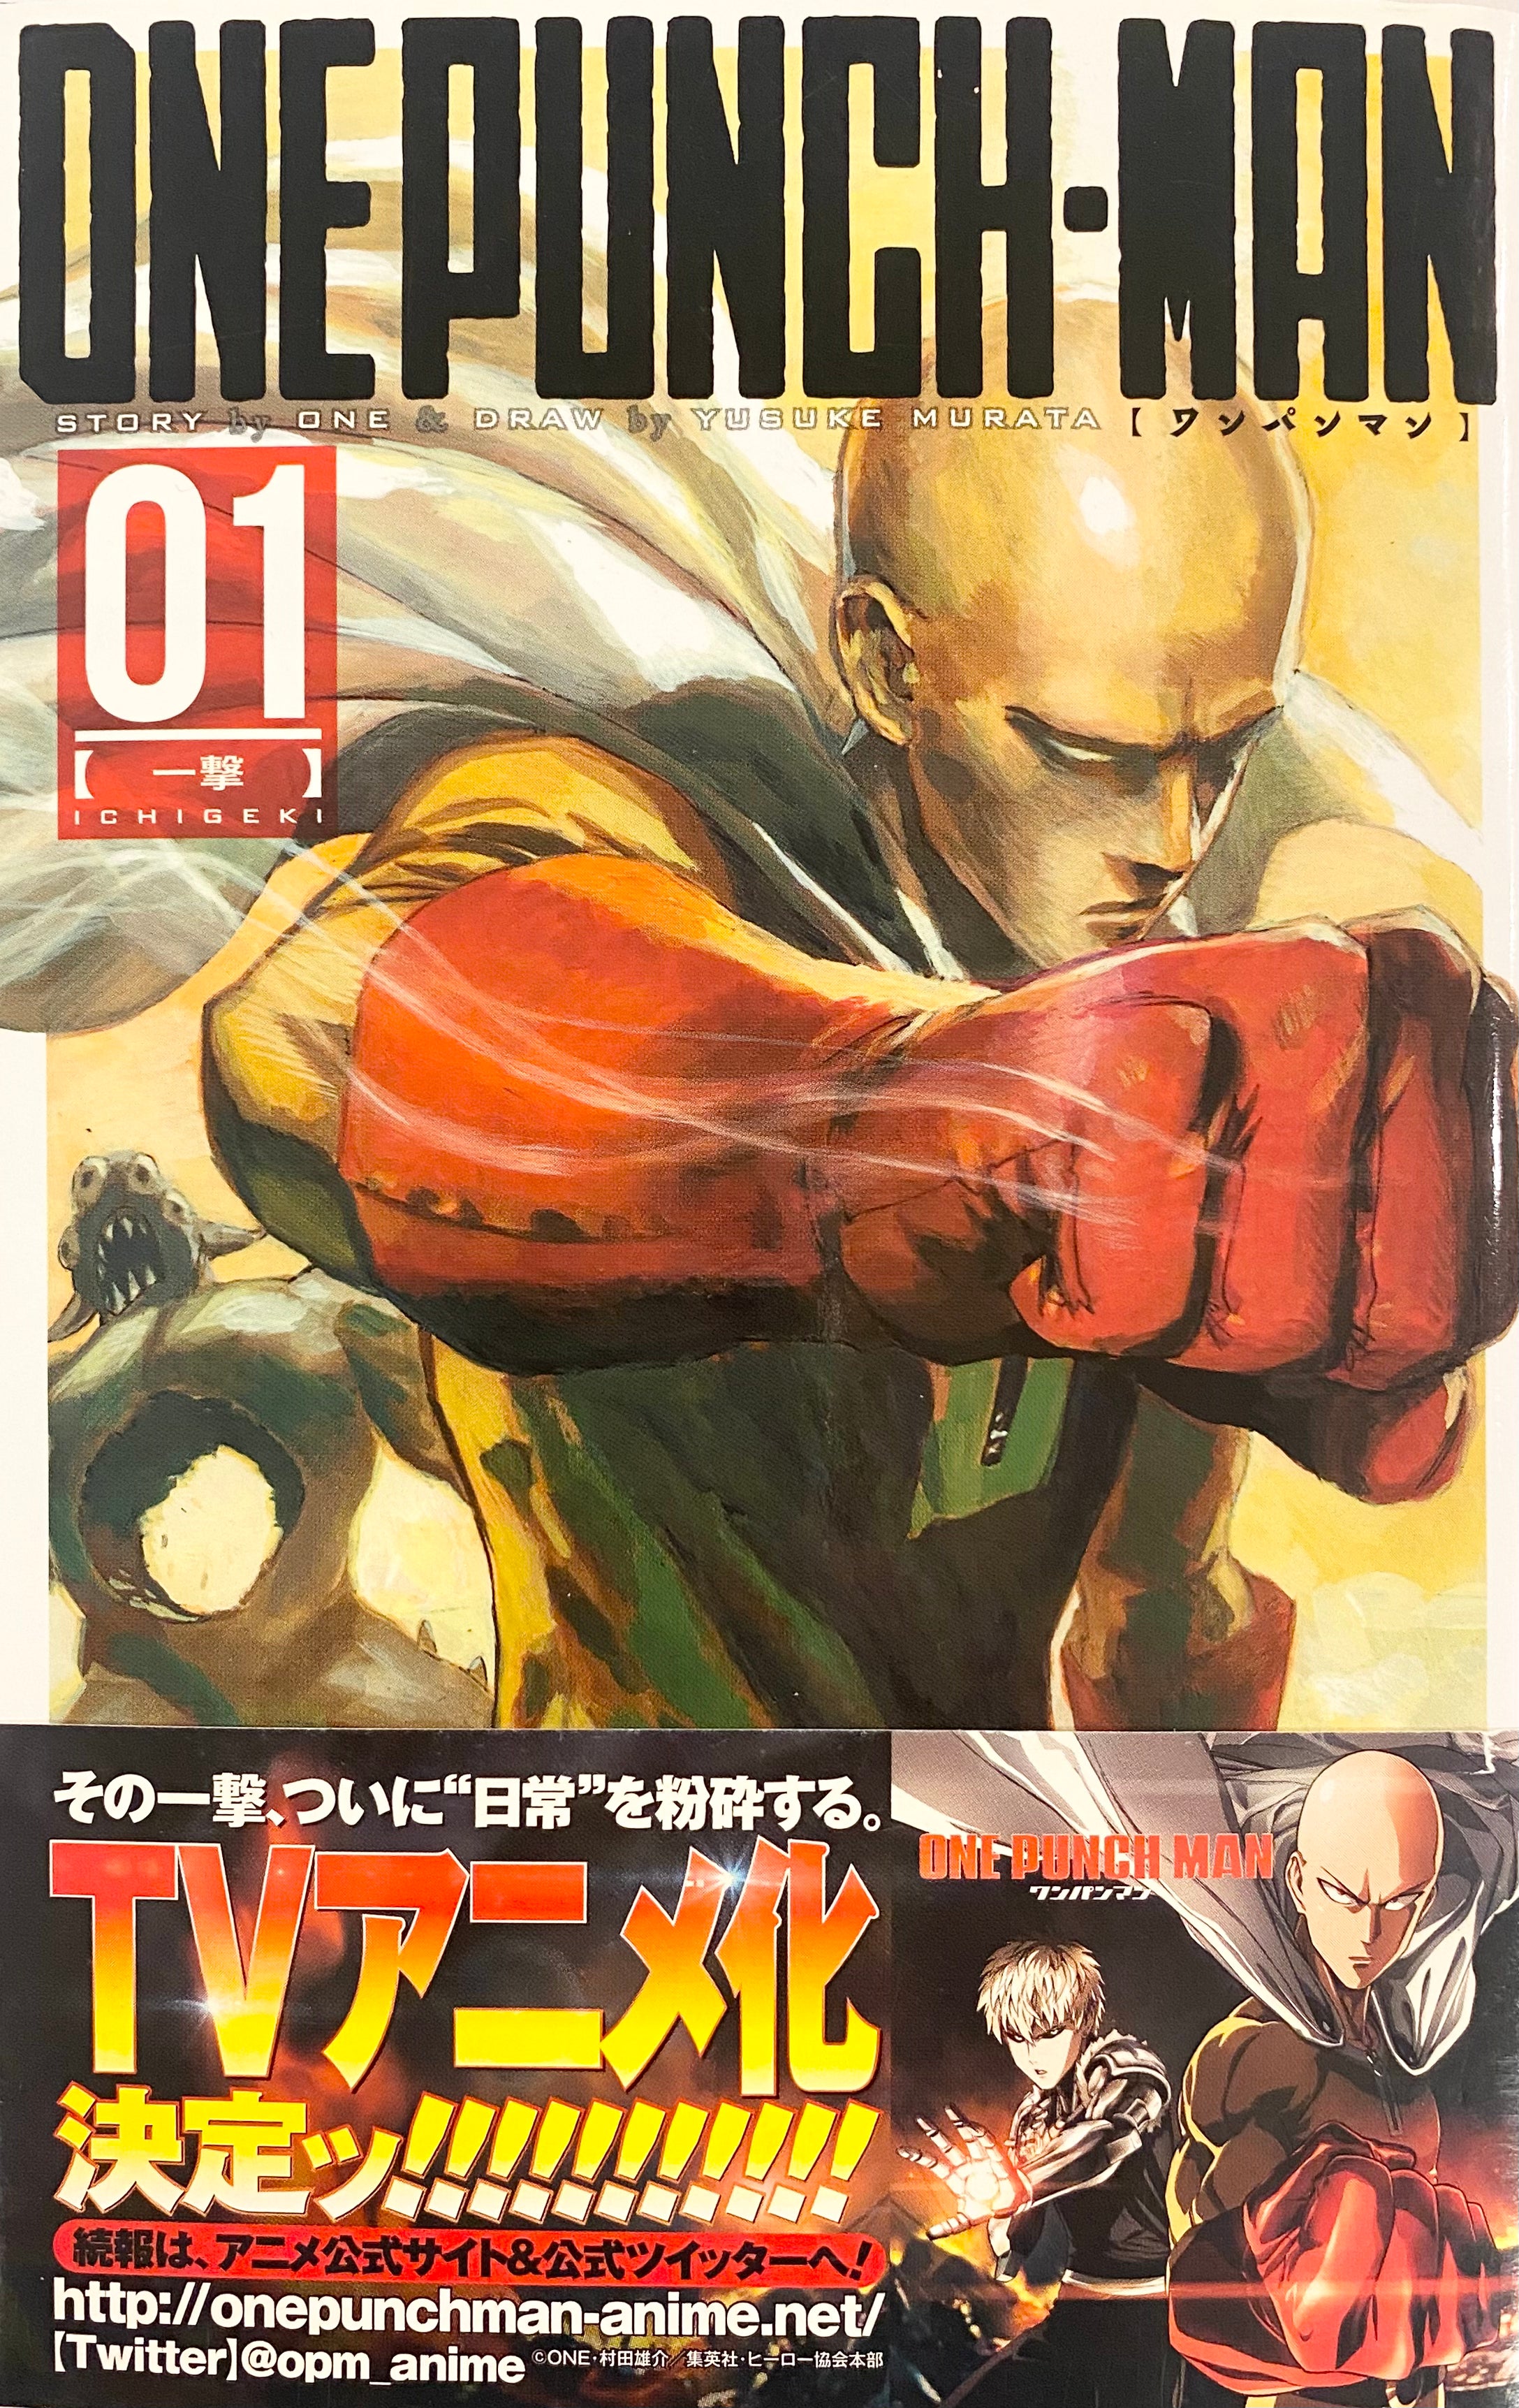 One Punch Man Vol.1- Official Japanese Edition | MangaComic: Buy/Order Now